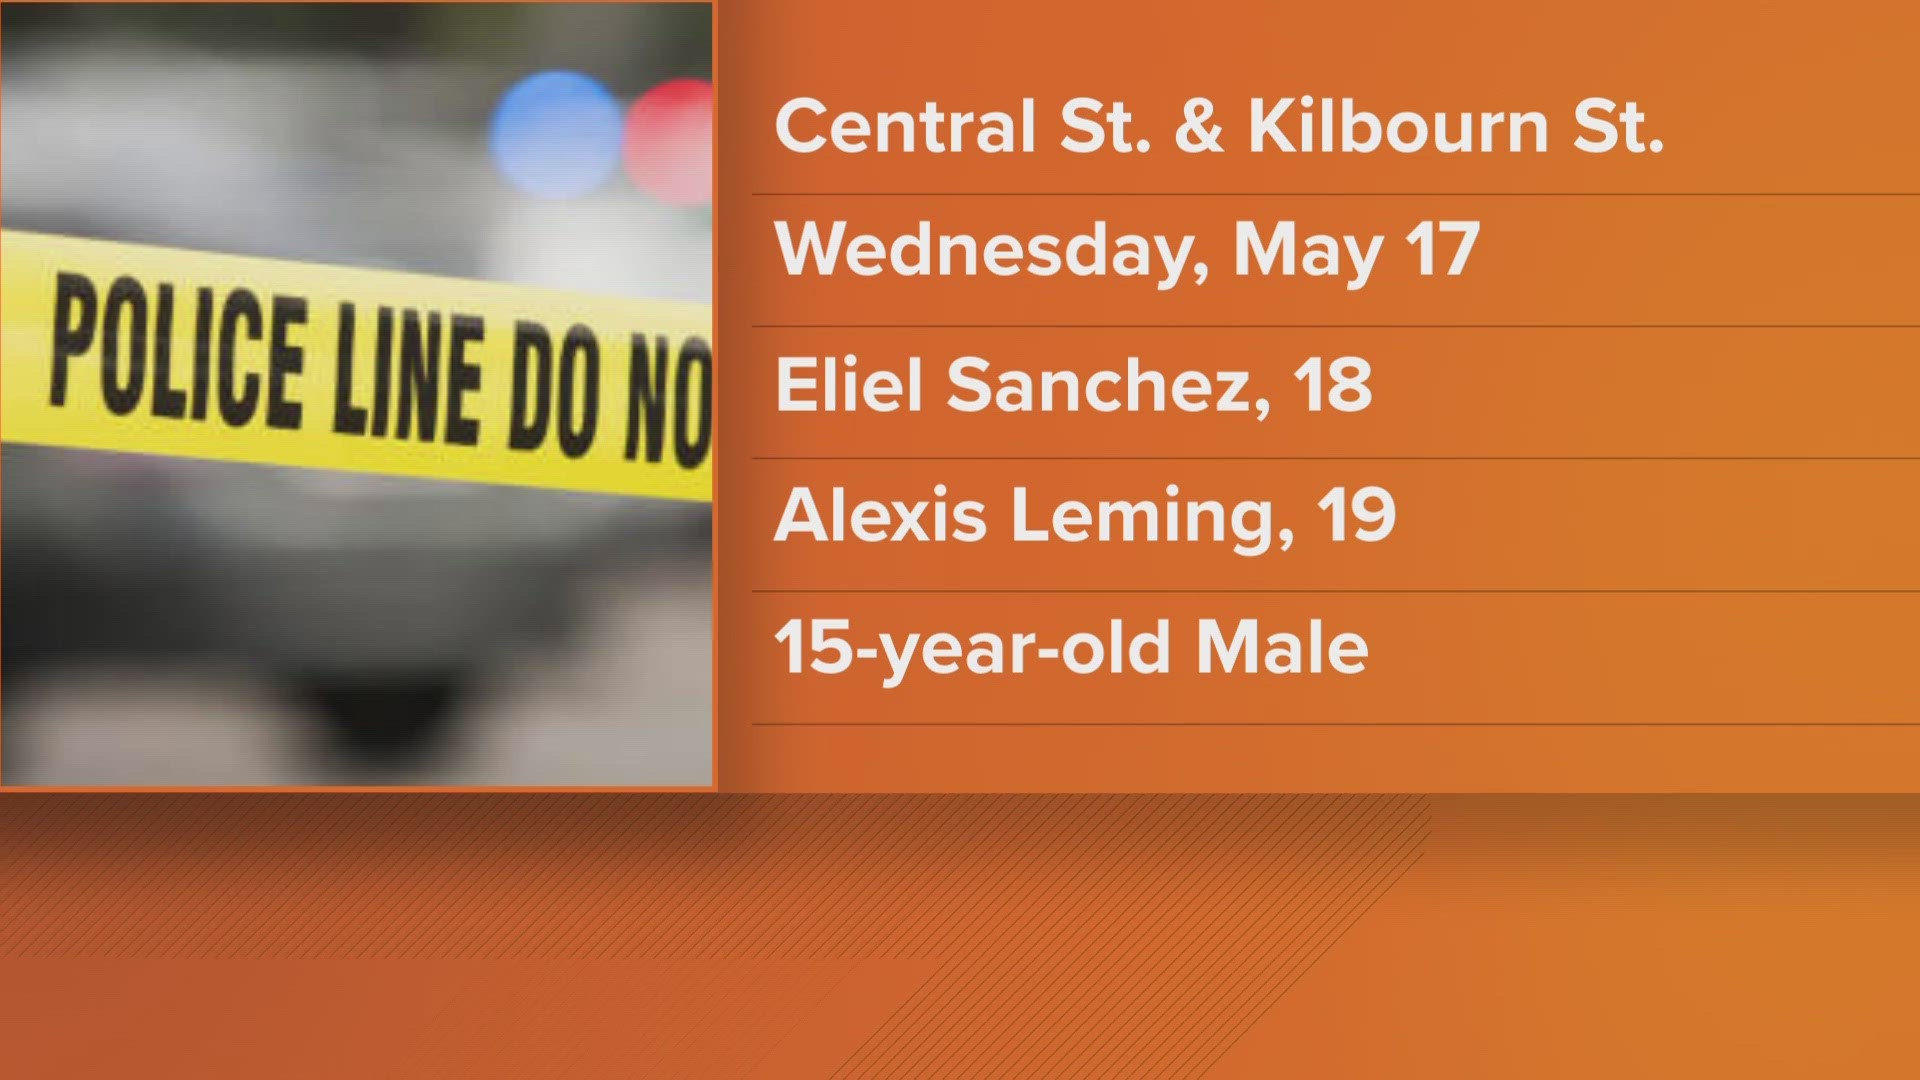 The shootings happened on central street and Kilbourn court on Wednesday.